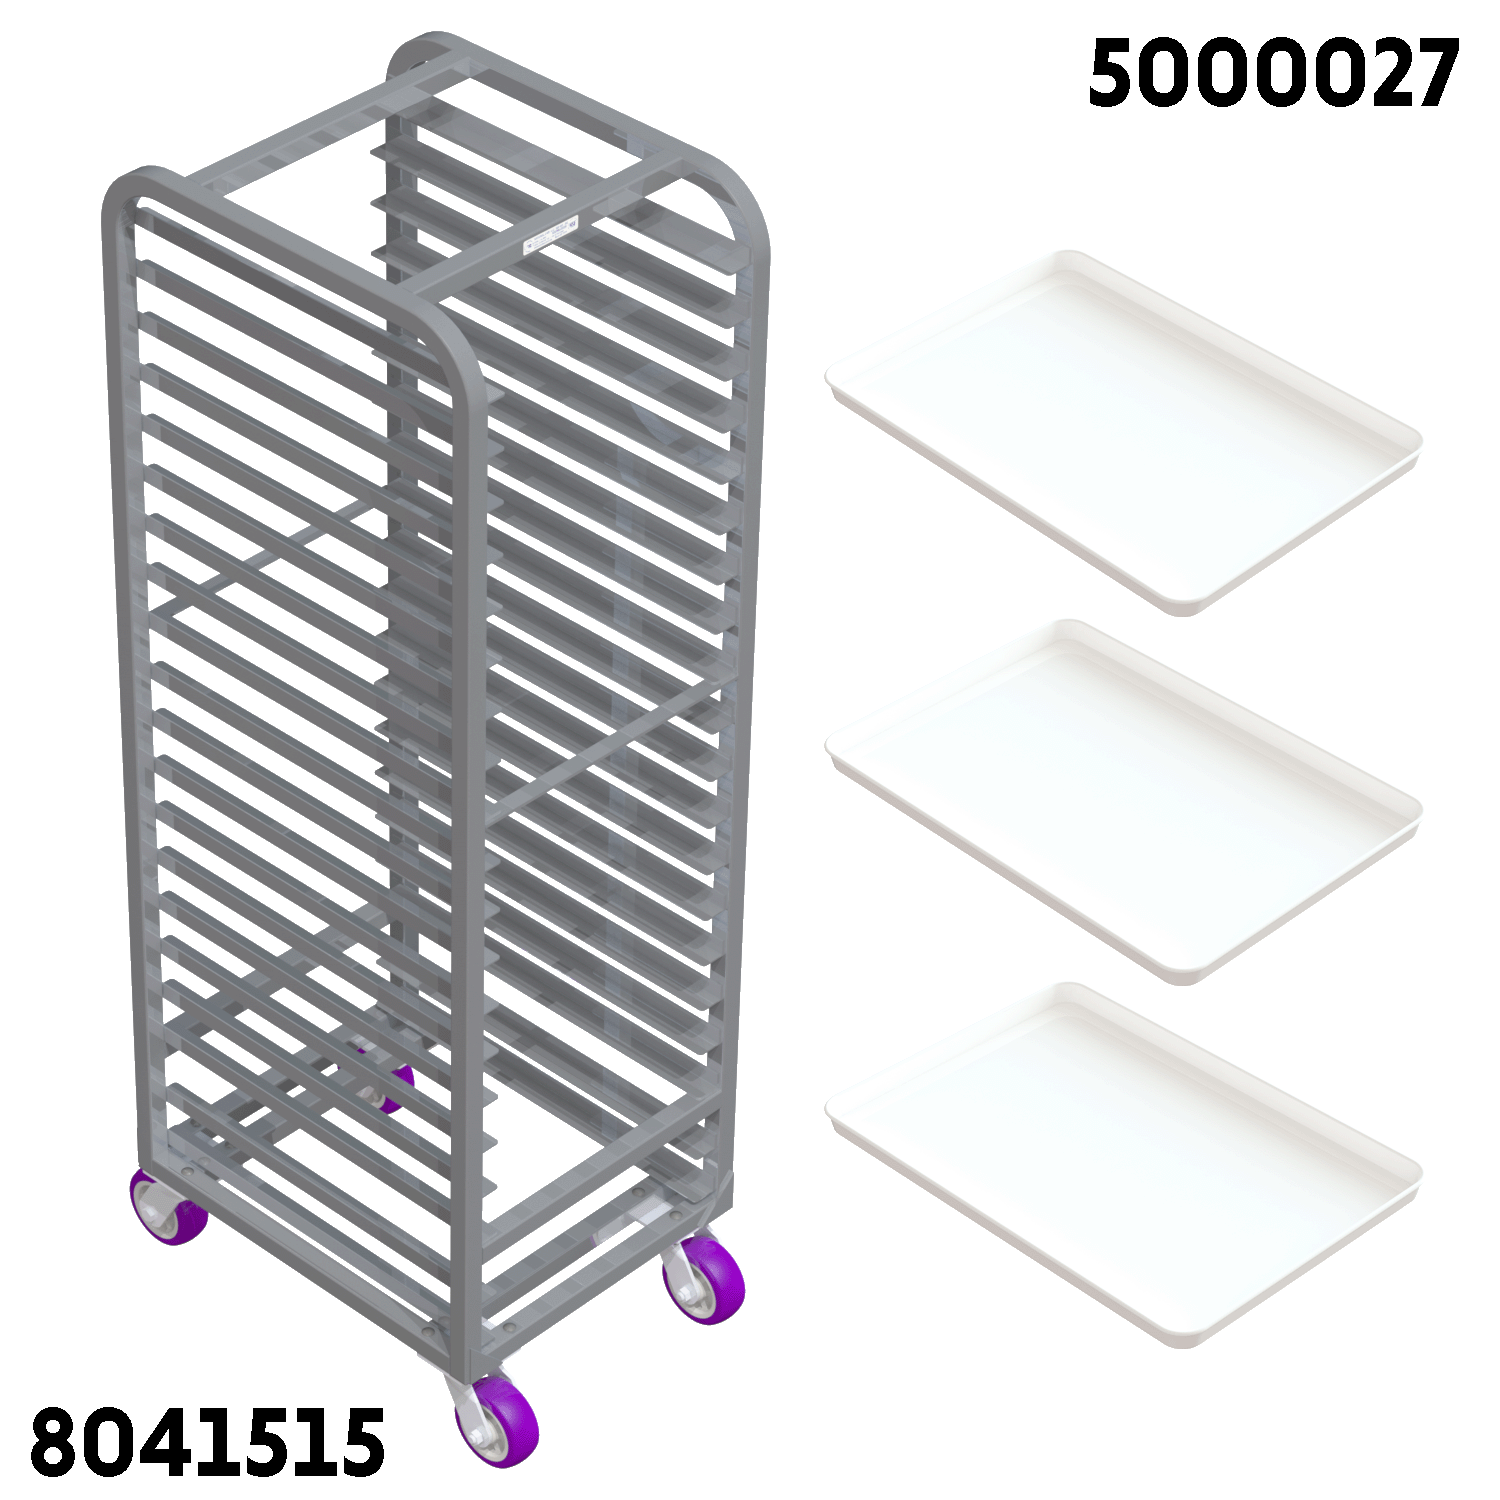 NSF approved. This food service carts meets strict standards and procedures imposed by NSF.